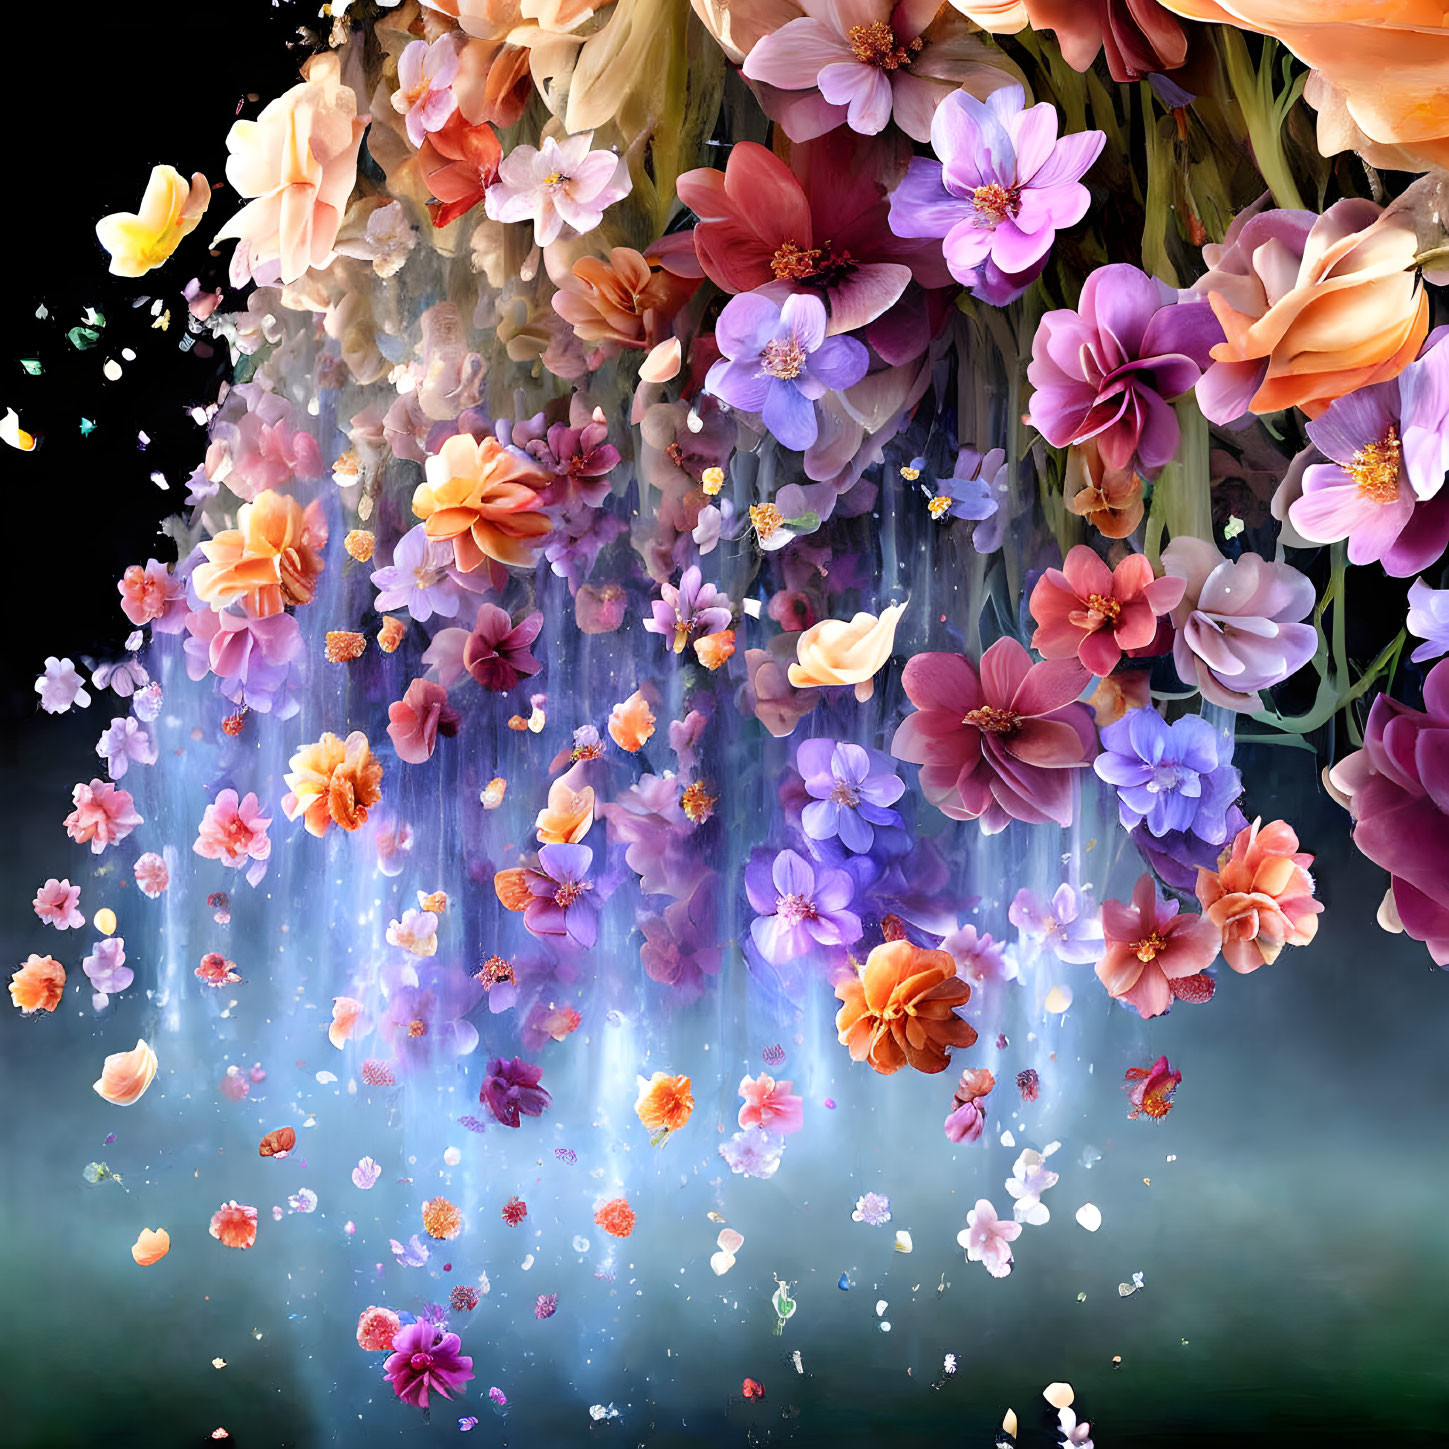 Vibrant array of floating flowers in pink, orange, and purple on dark background